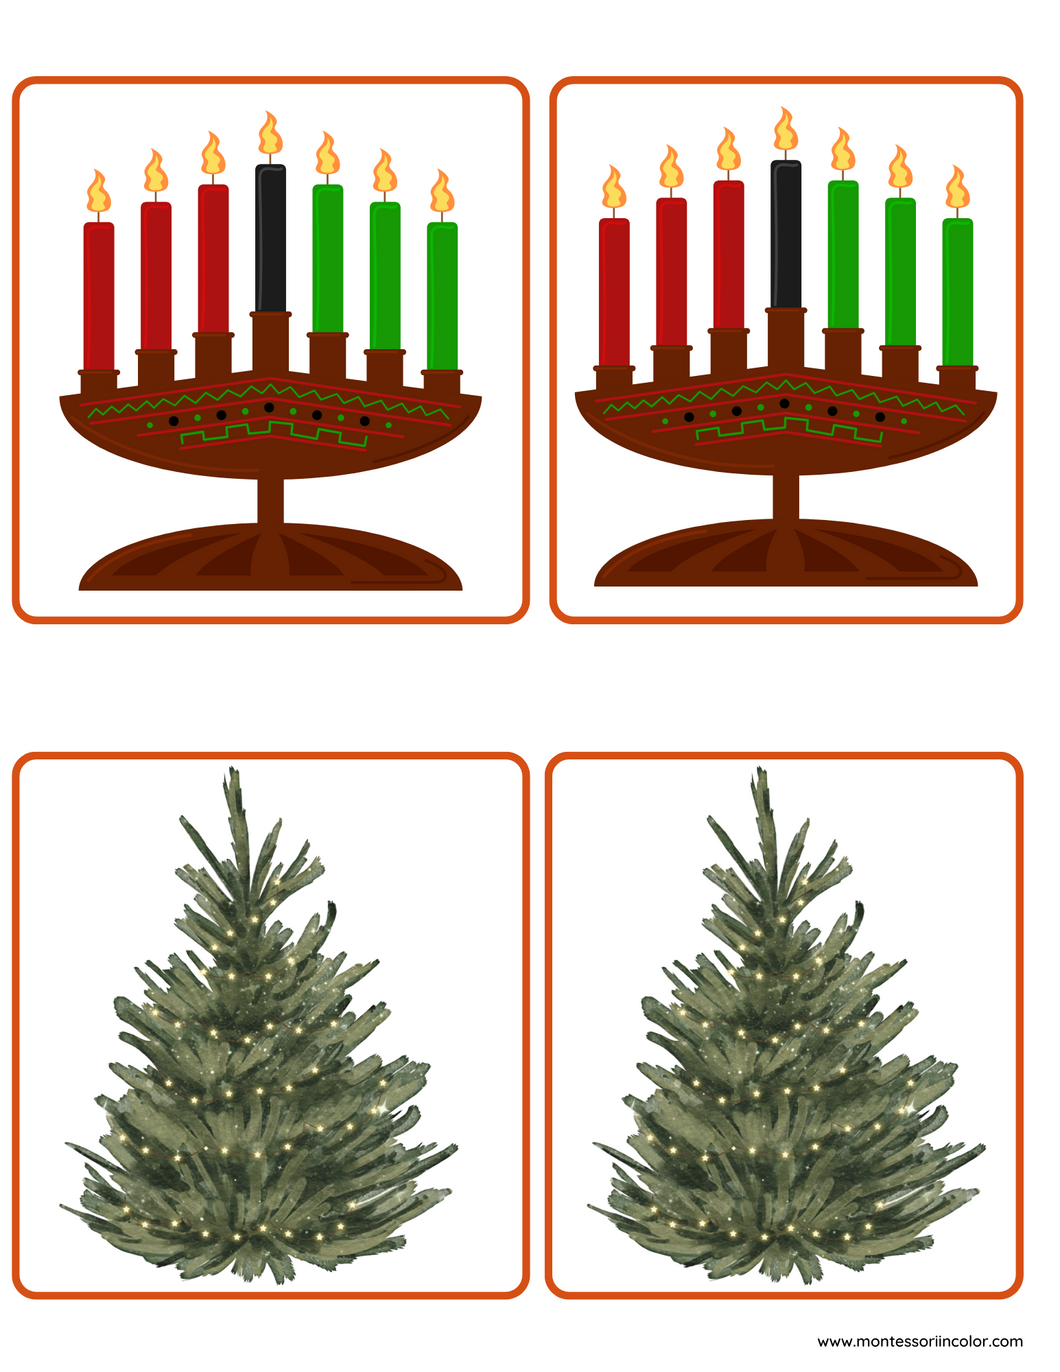 December Holidays Matching Cards- FREE DOWNLOAD